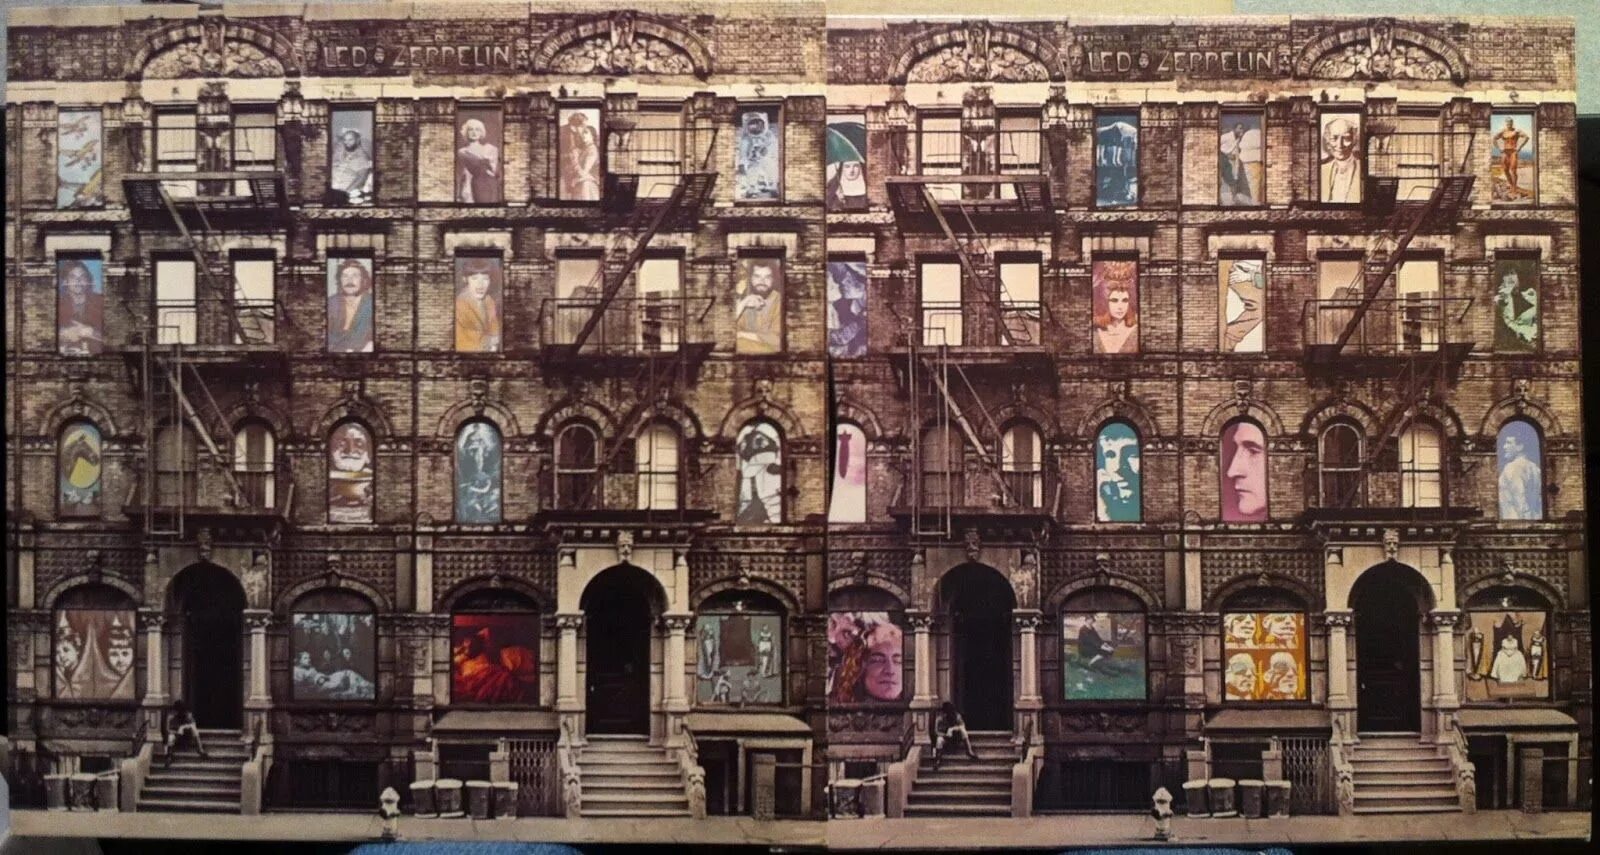 Led zeppelin physical. Лед Зеппелин physical Graffiti. Led Zeppelin - physical Graffiti (1975) LP. Led Zeppelin physical Graffiti LP. Led Zeppelin physical Graffiti 1975 обложка.